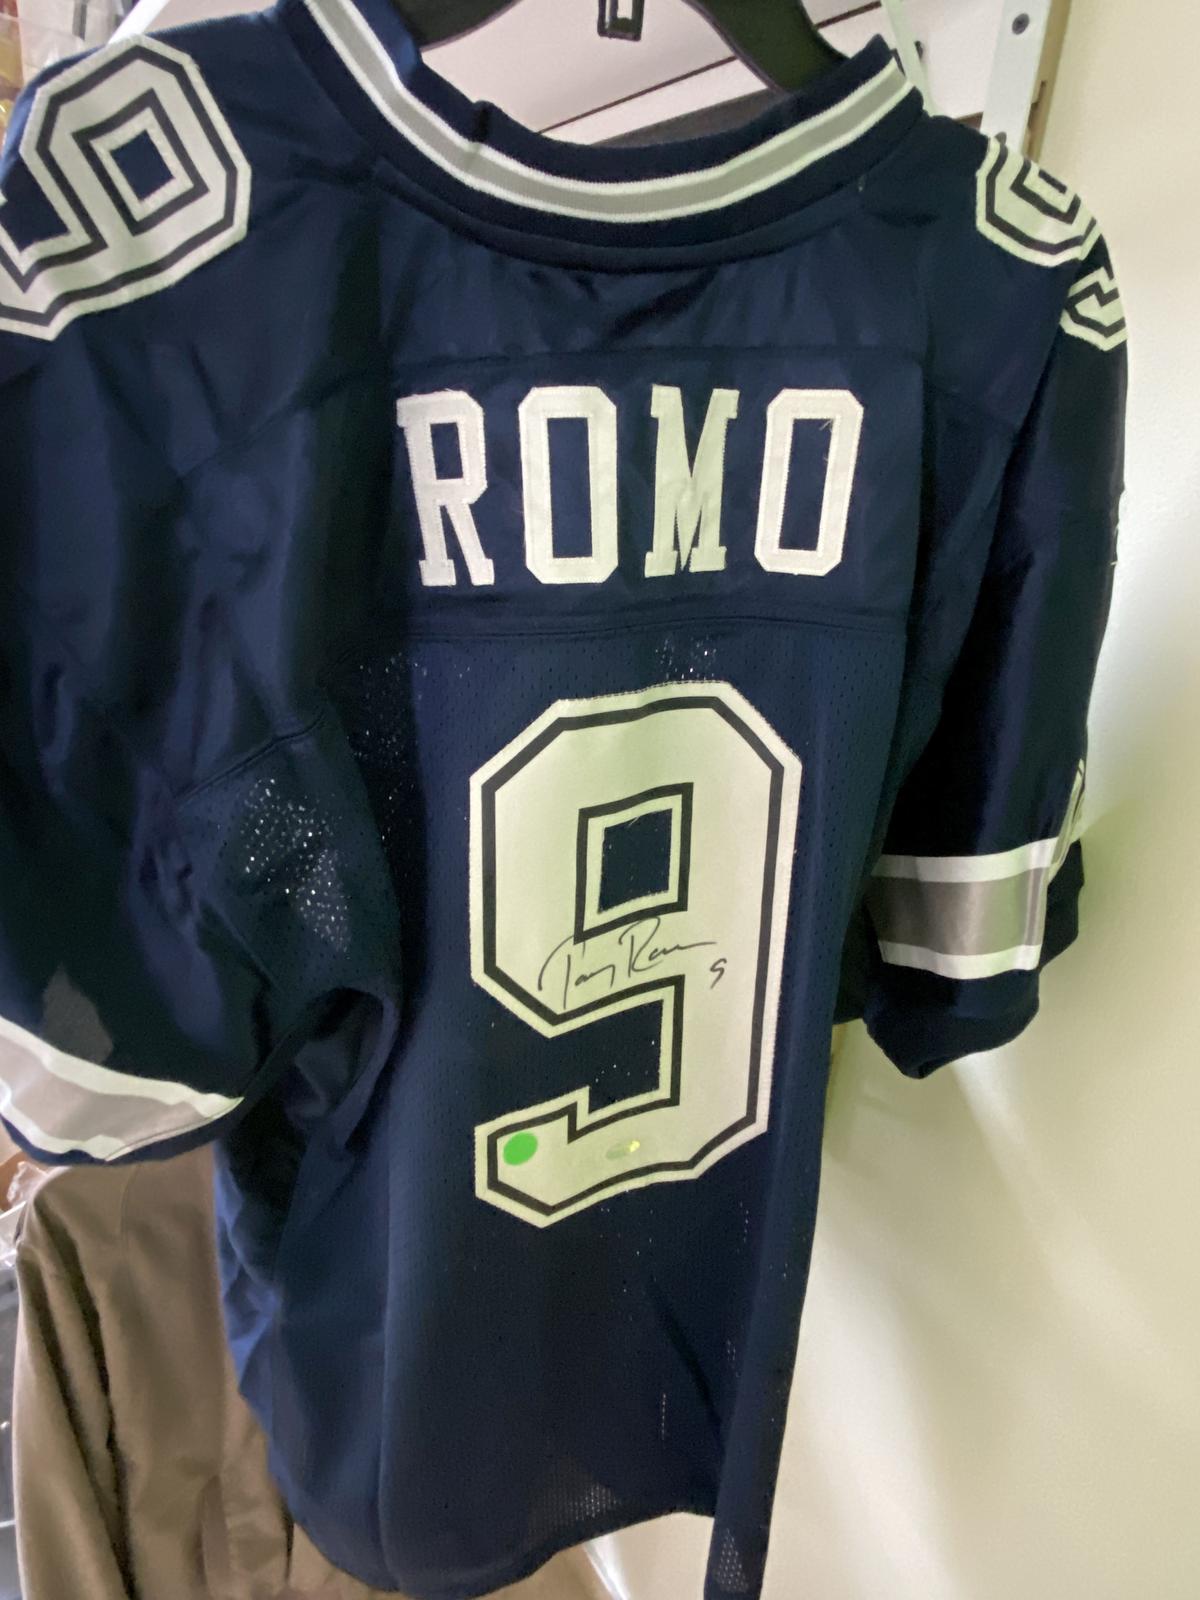 Tony Romo Autographed Dallas Cowboys Team Jersey and Authenticated by Steiner Sports